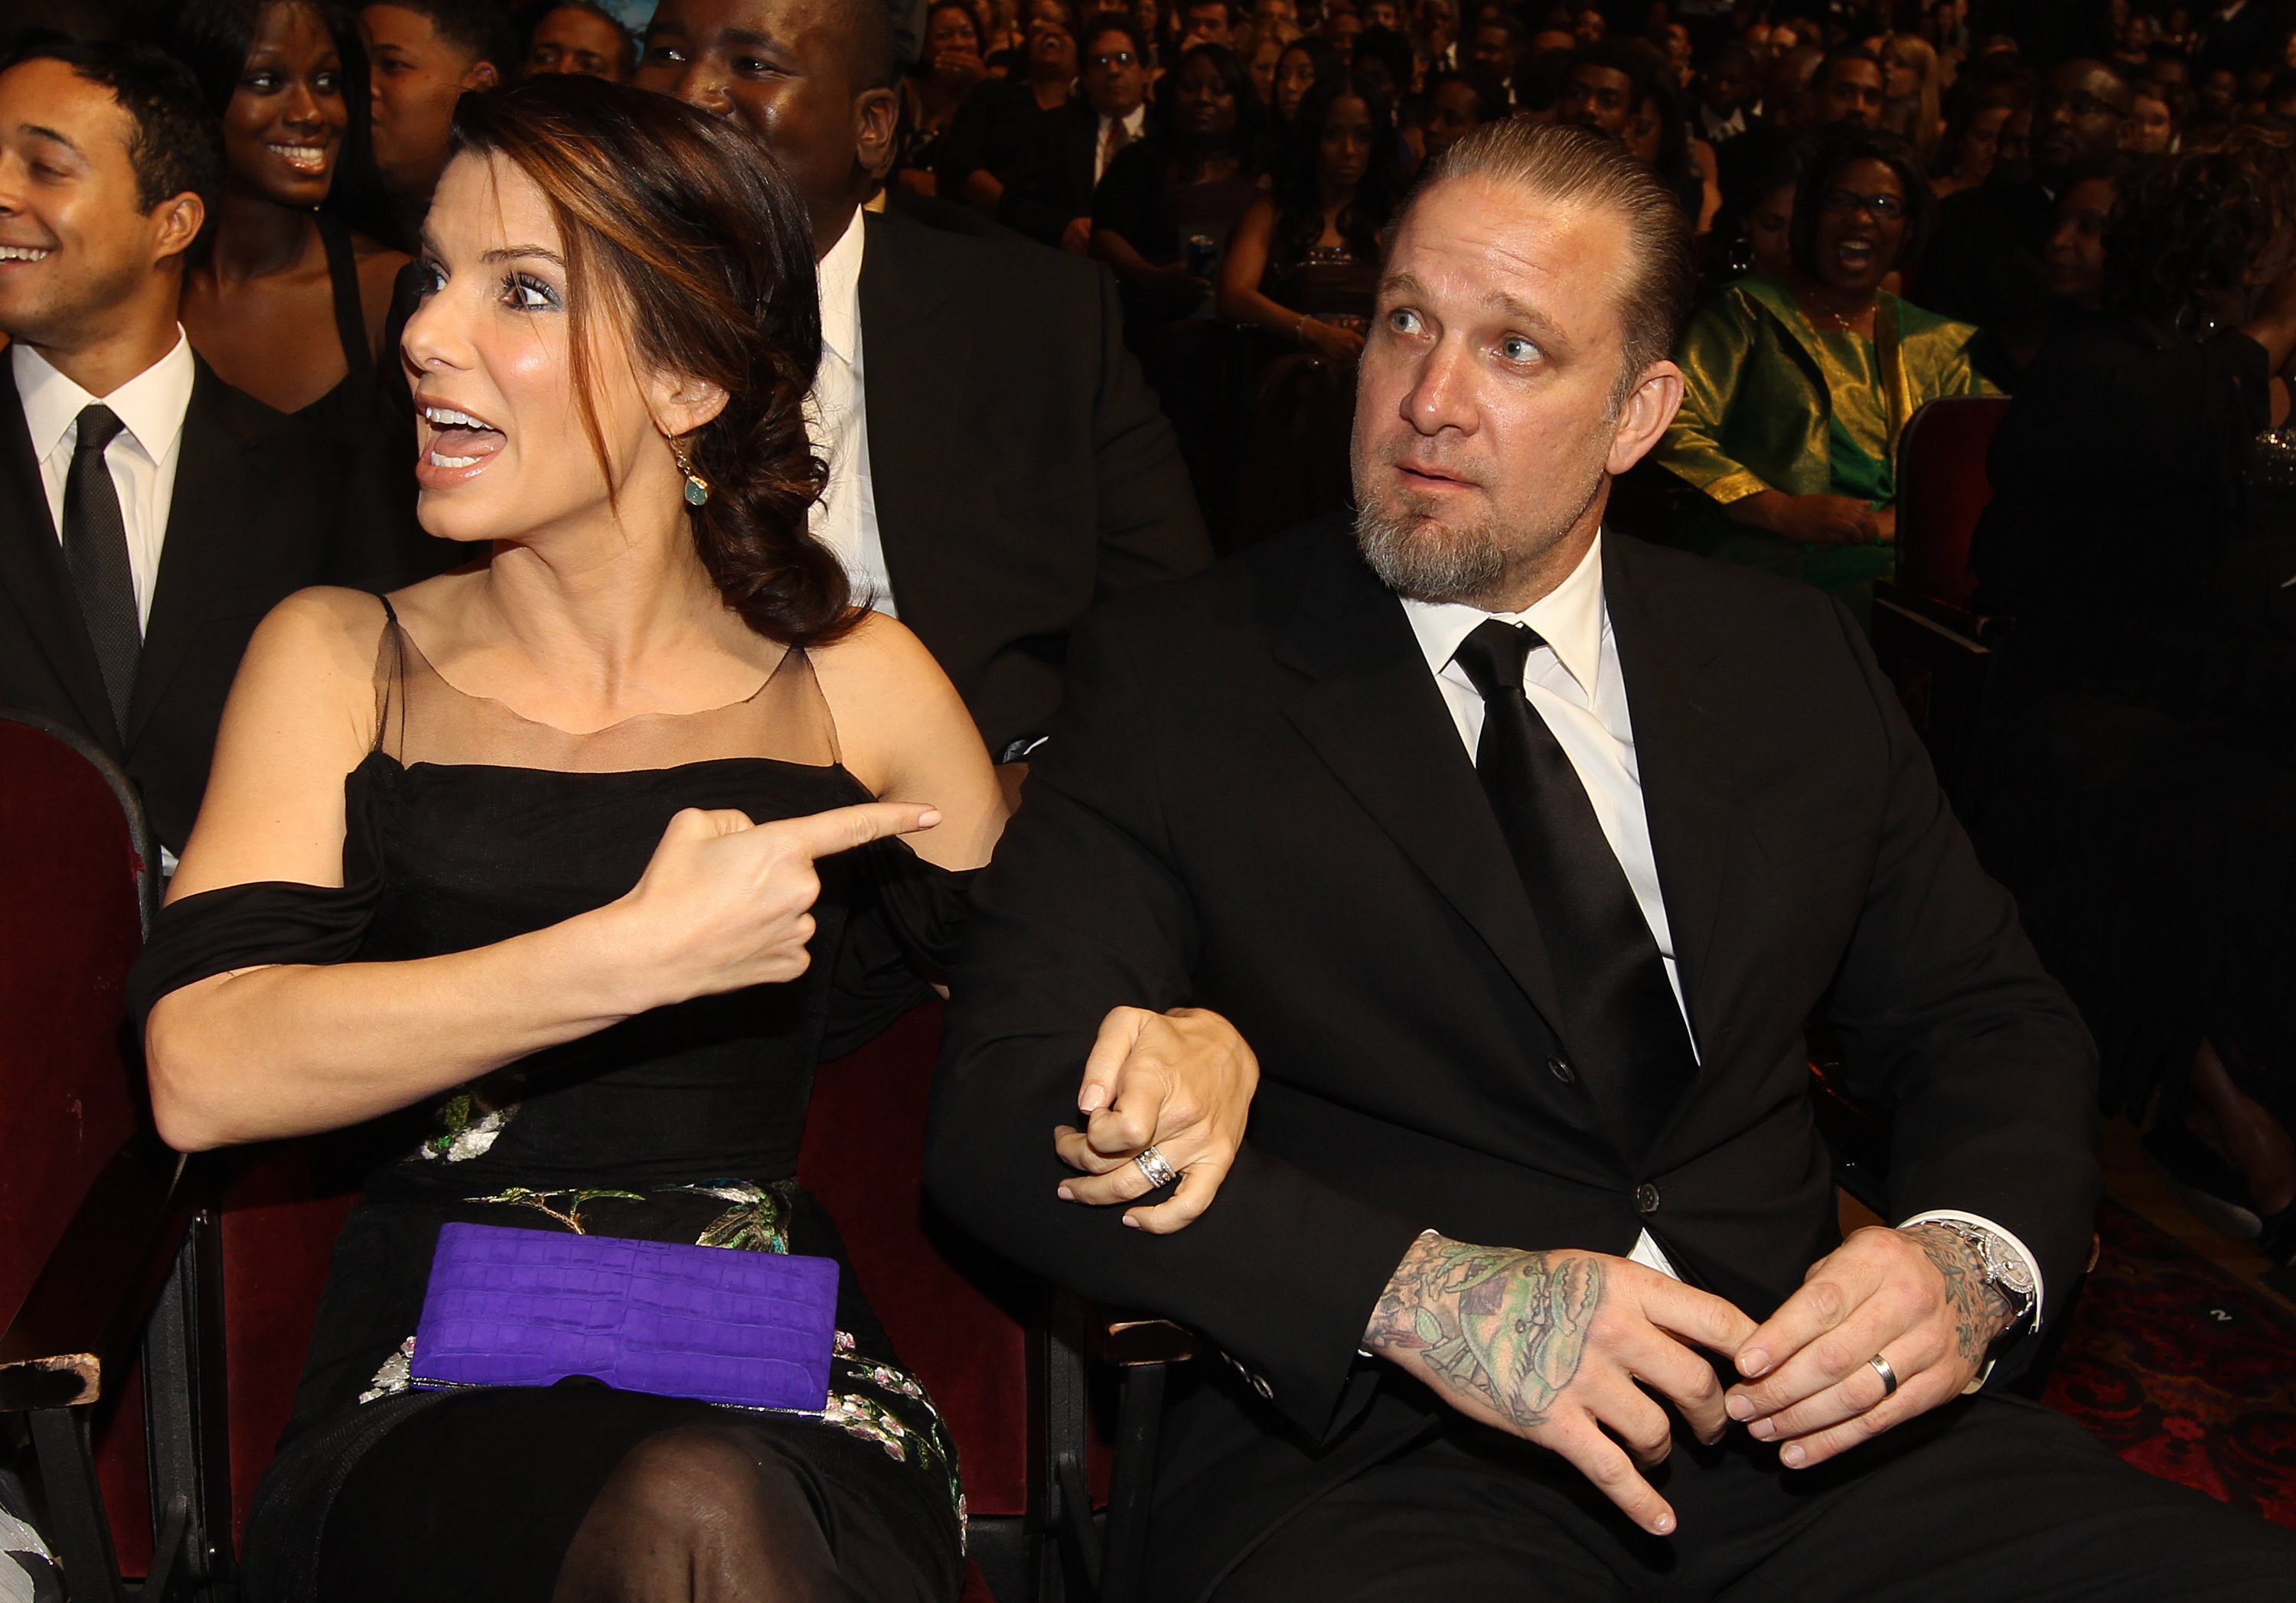 Sandra Bullock and Jesse James at the 41st NAACP Image awards on February 26, 2010 in Los Angeles, California | Source: Getty Images